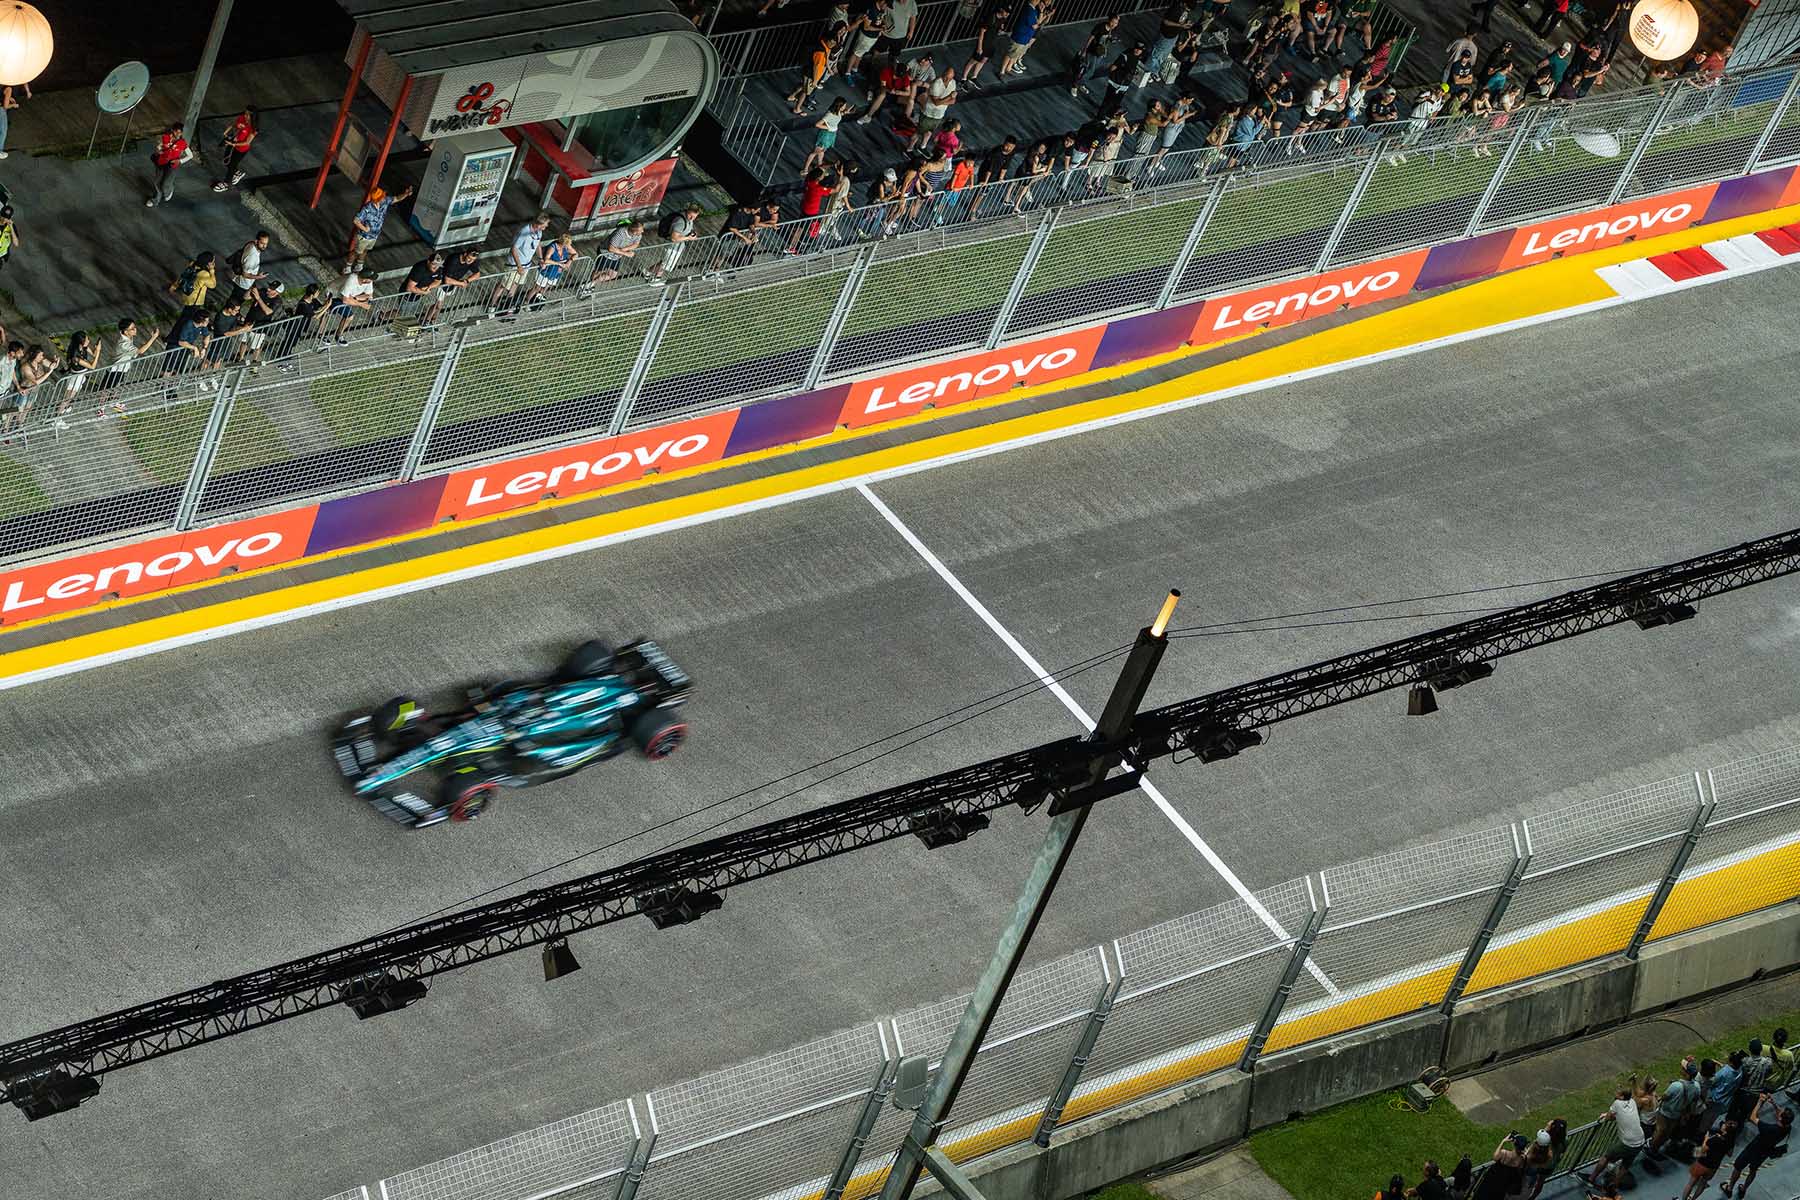 High angle view of spectators watching a F1 car drive by in a practice session at the Marina Bay Street Circuit in Singapore.